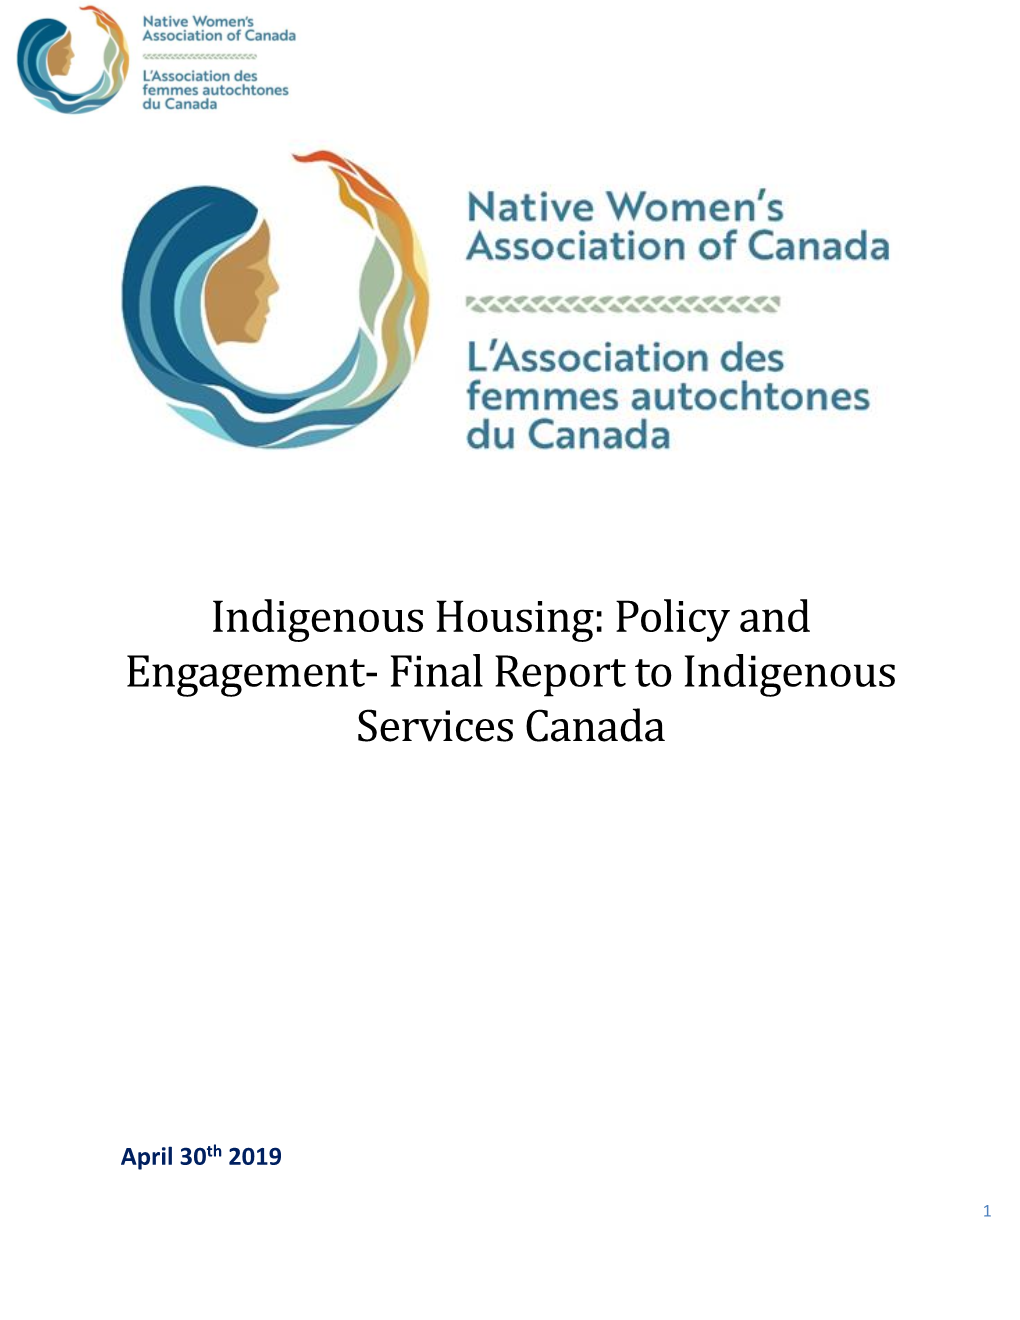 Indigenous Housing: Policy and Engagement- Final Report to Indigenous Services Canada